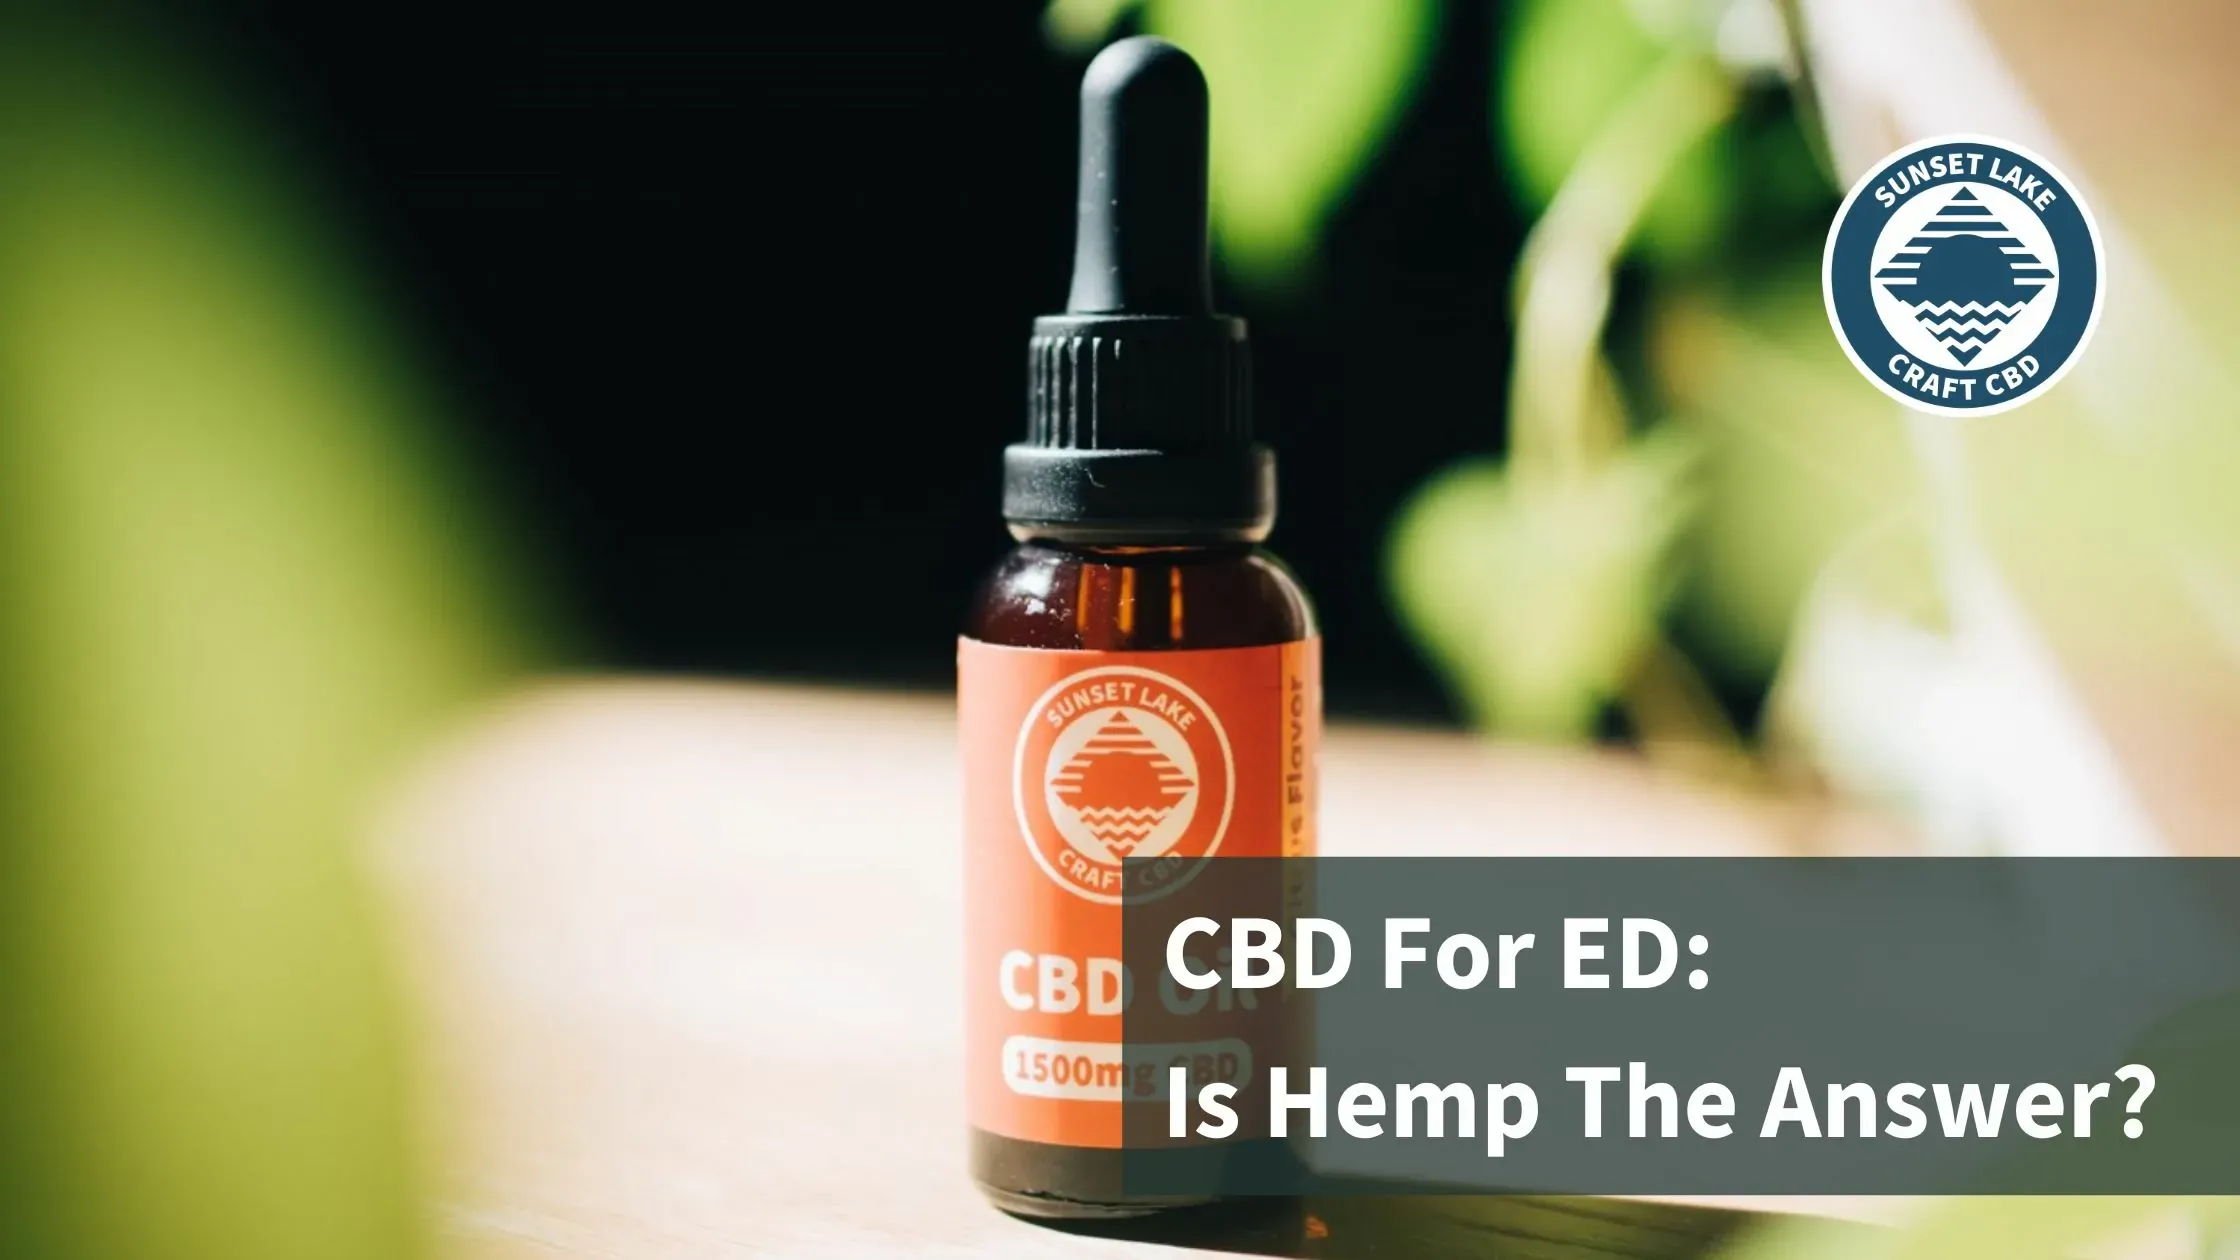 CBD oil on nightstand. Text reads "CBD for ED: Is hemp the answer?"